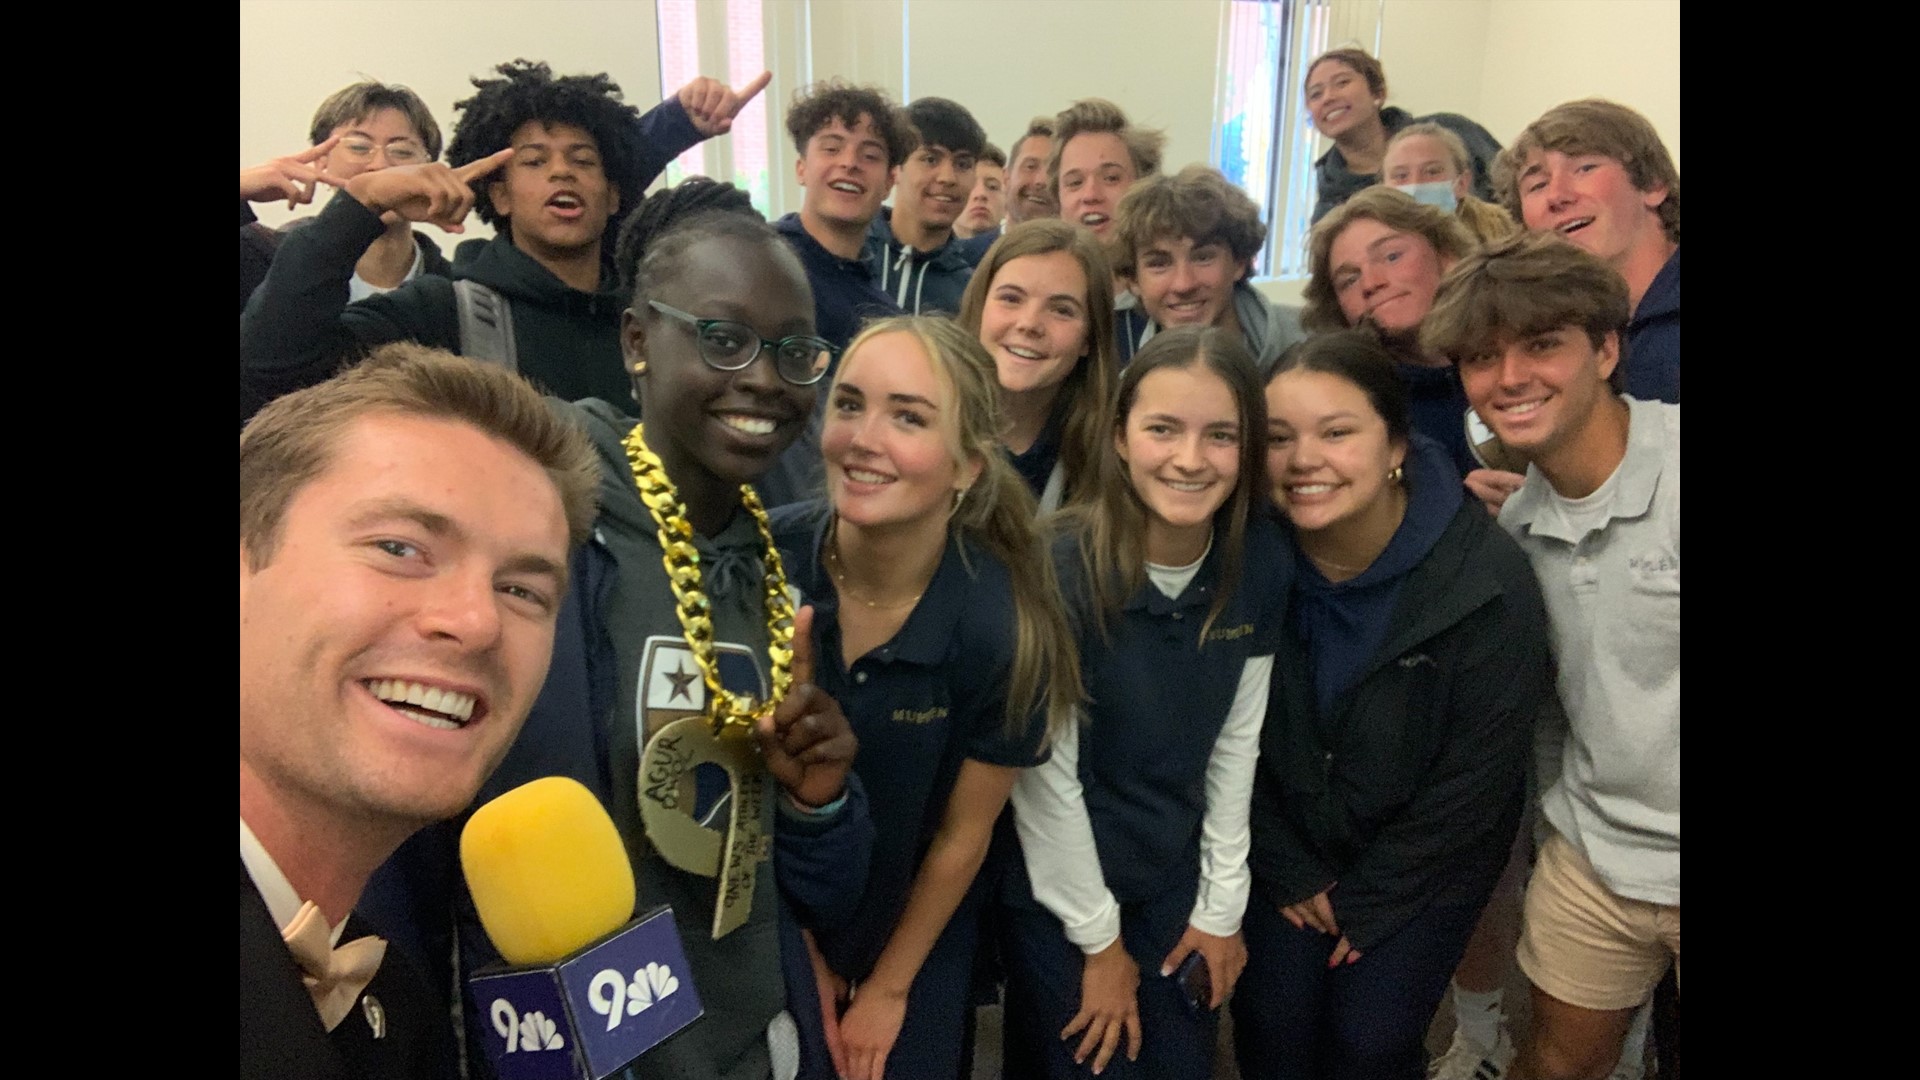 Dwol wins the highest Prep Rally as the 9NEWS Colorado high school athlete of the week